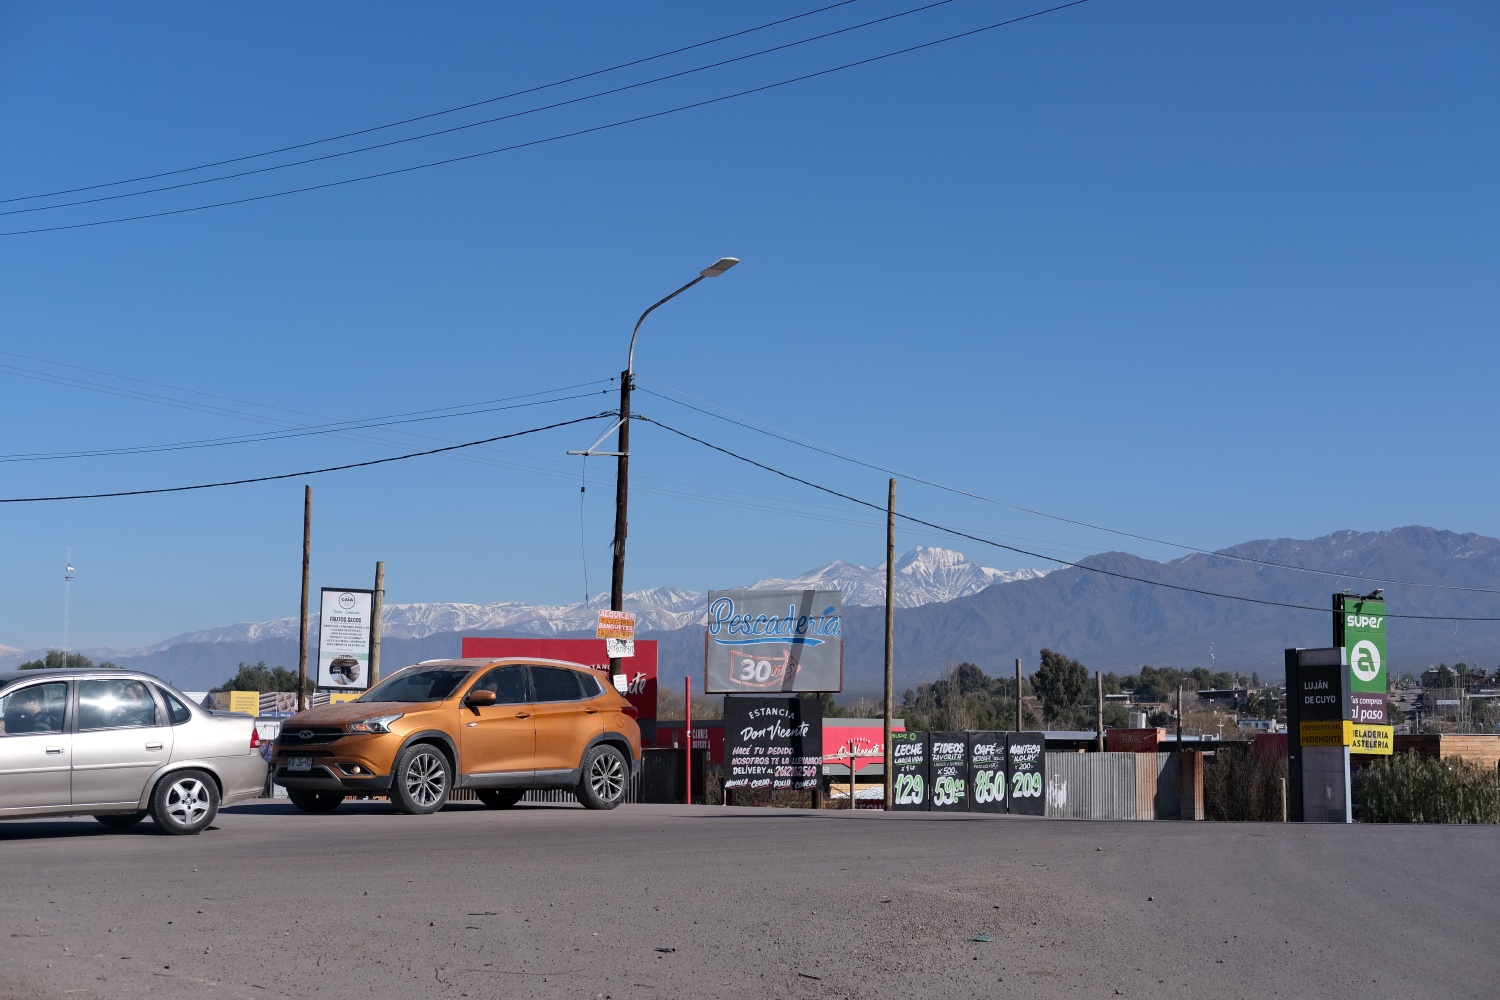 Mendoza is surrounded by mountain ranges on one side